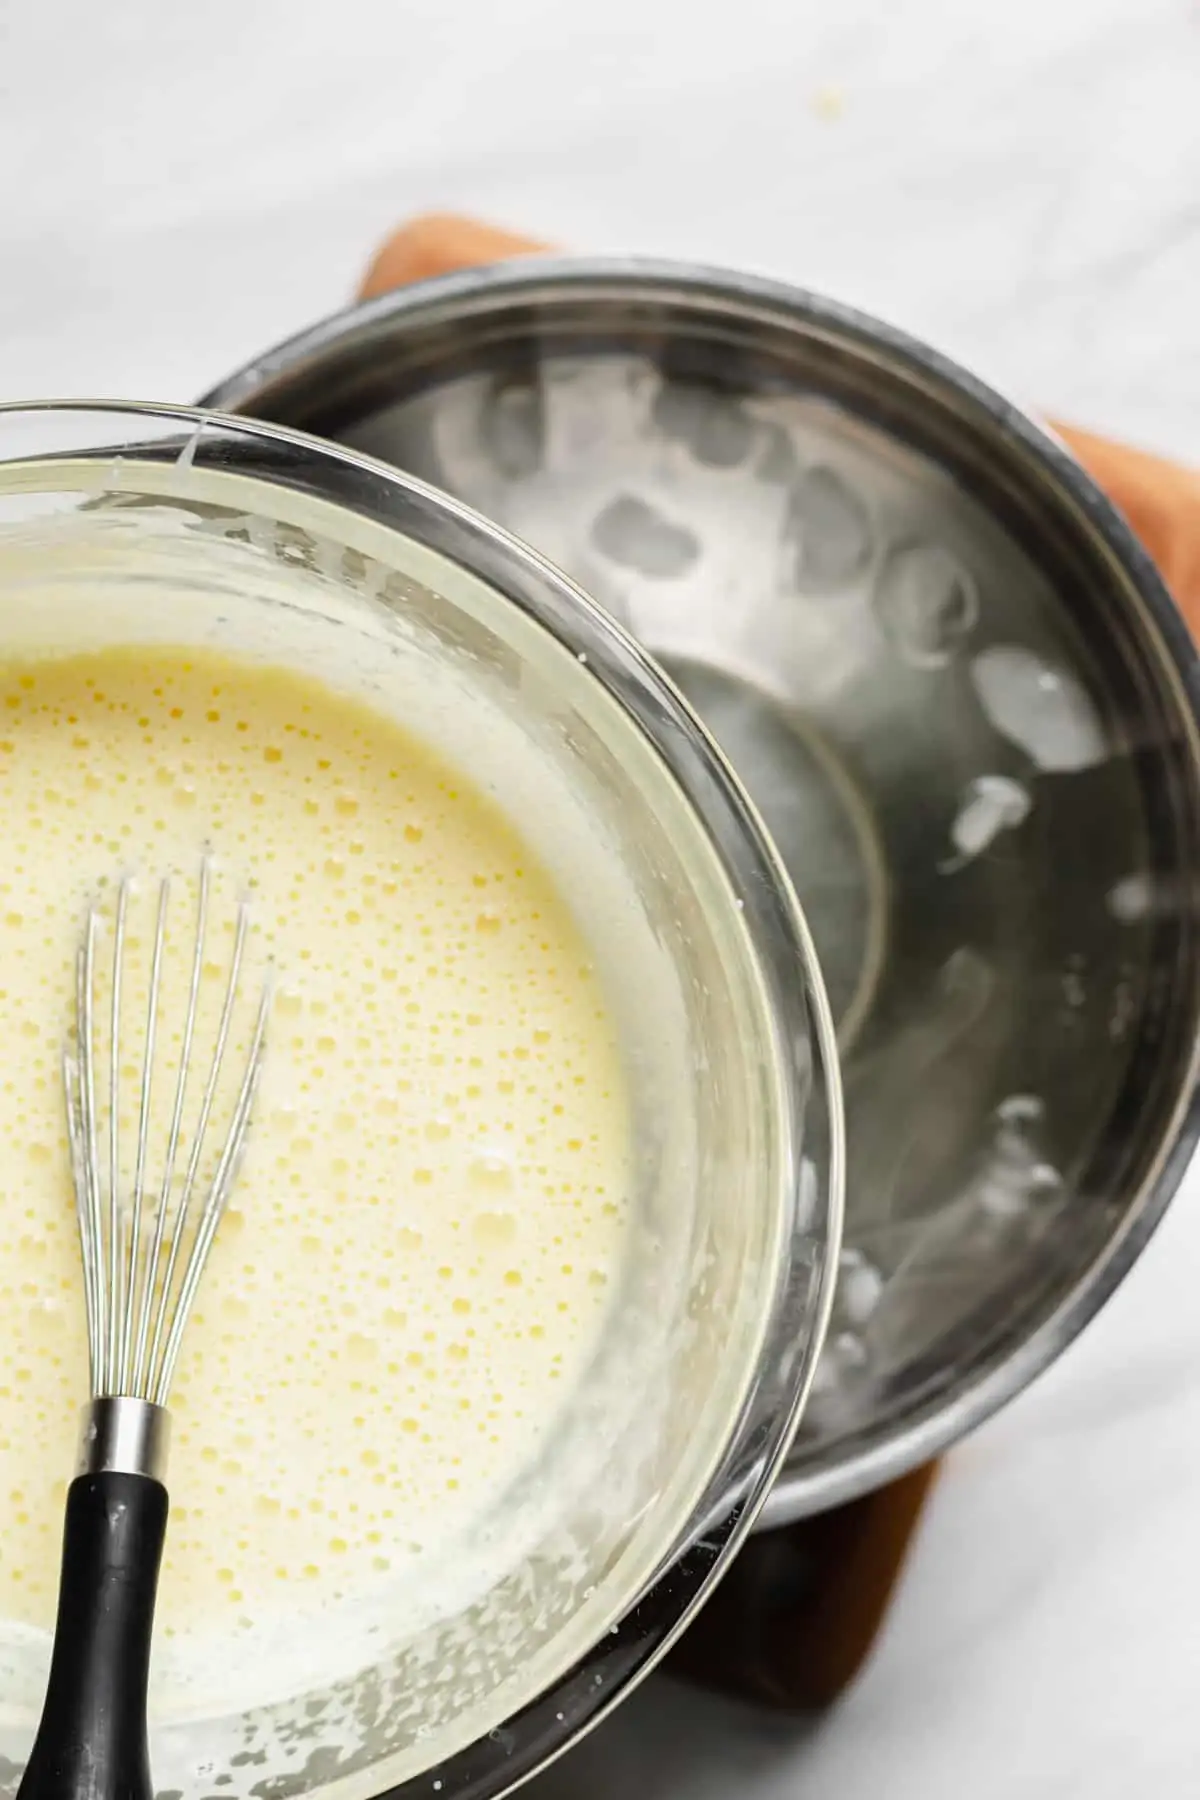 Bowl of vanilla sauce being placed onto a bowl of ice water.